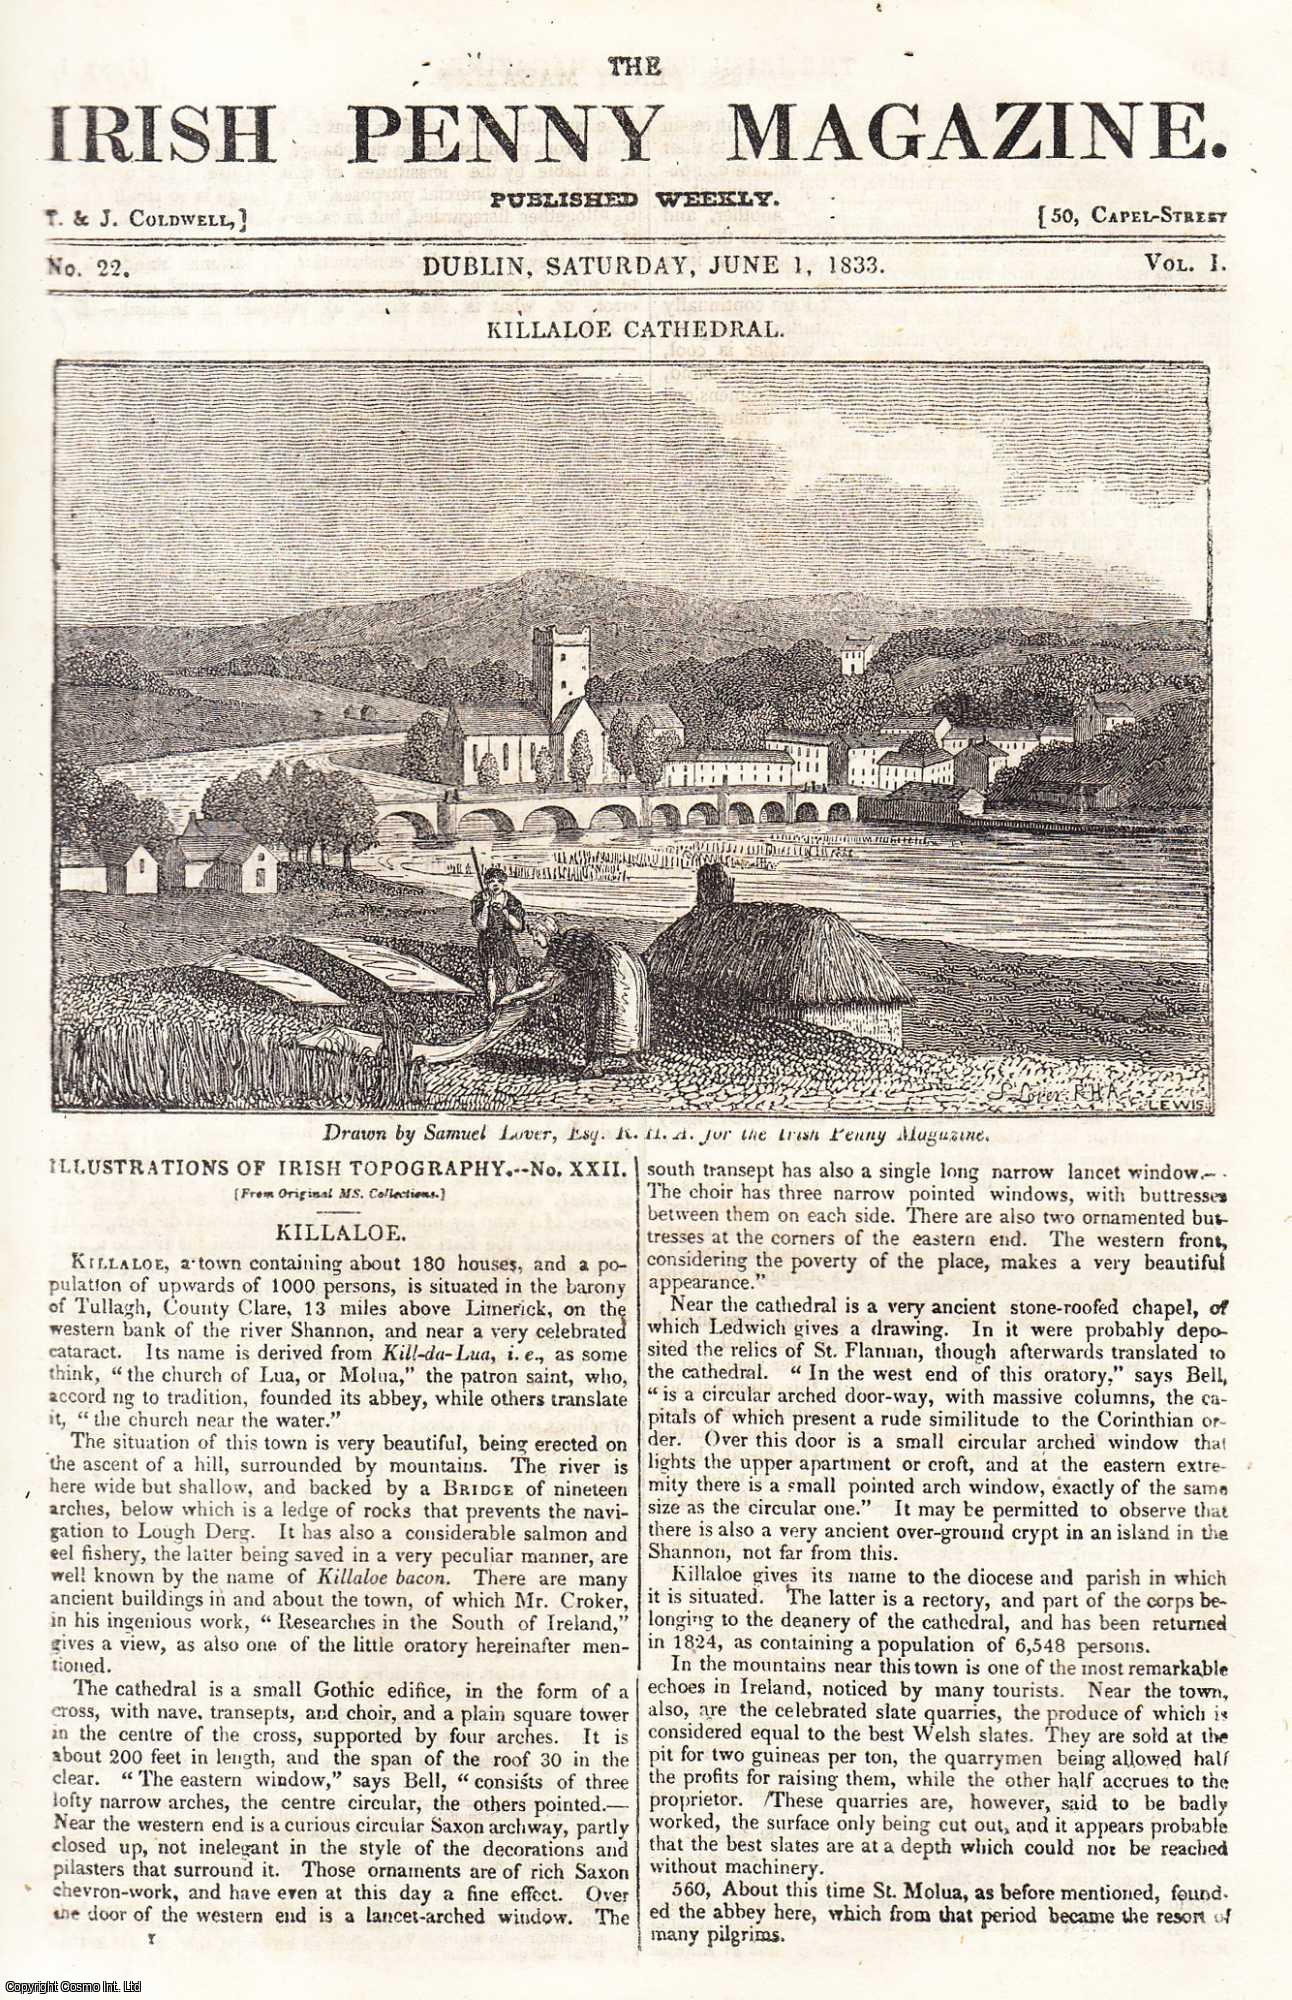 Irish Penny Magazine - 1833, Killaloe Cathedral & the County Wexford & its Peasantry. Featured in a full weekly issue of the uncommon Irish Penny Magazine, 1833.